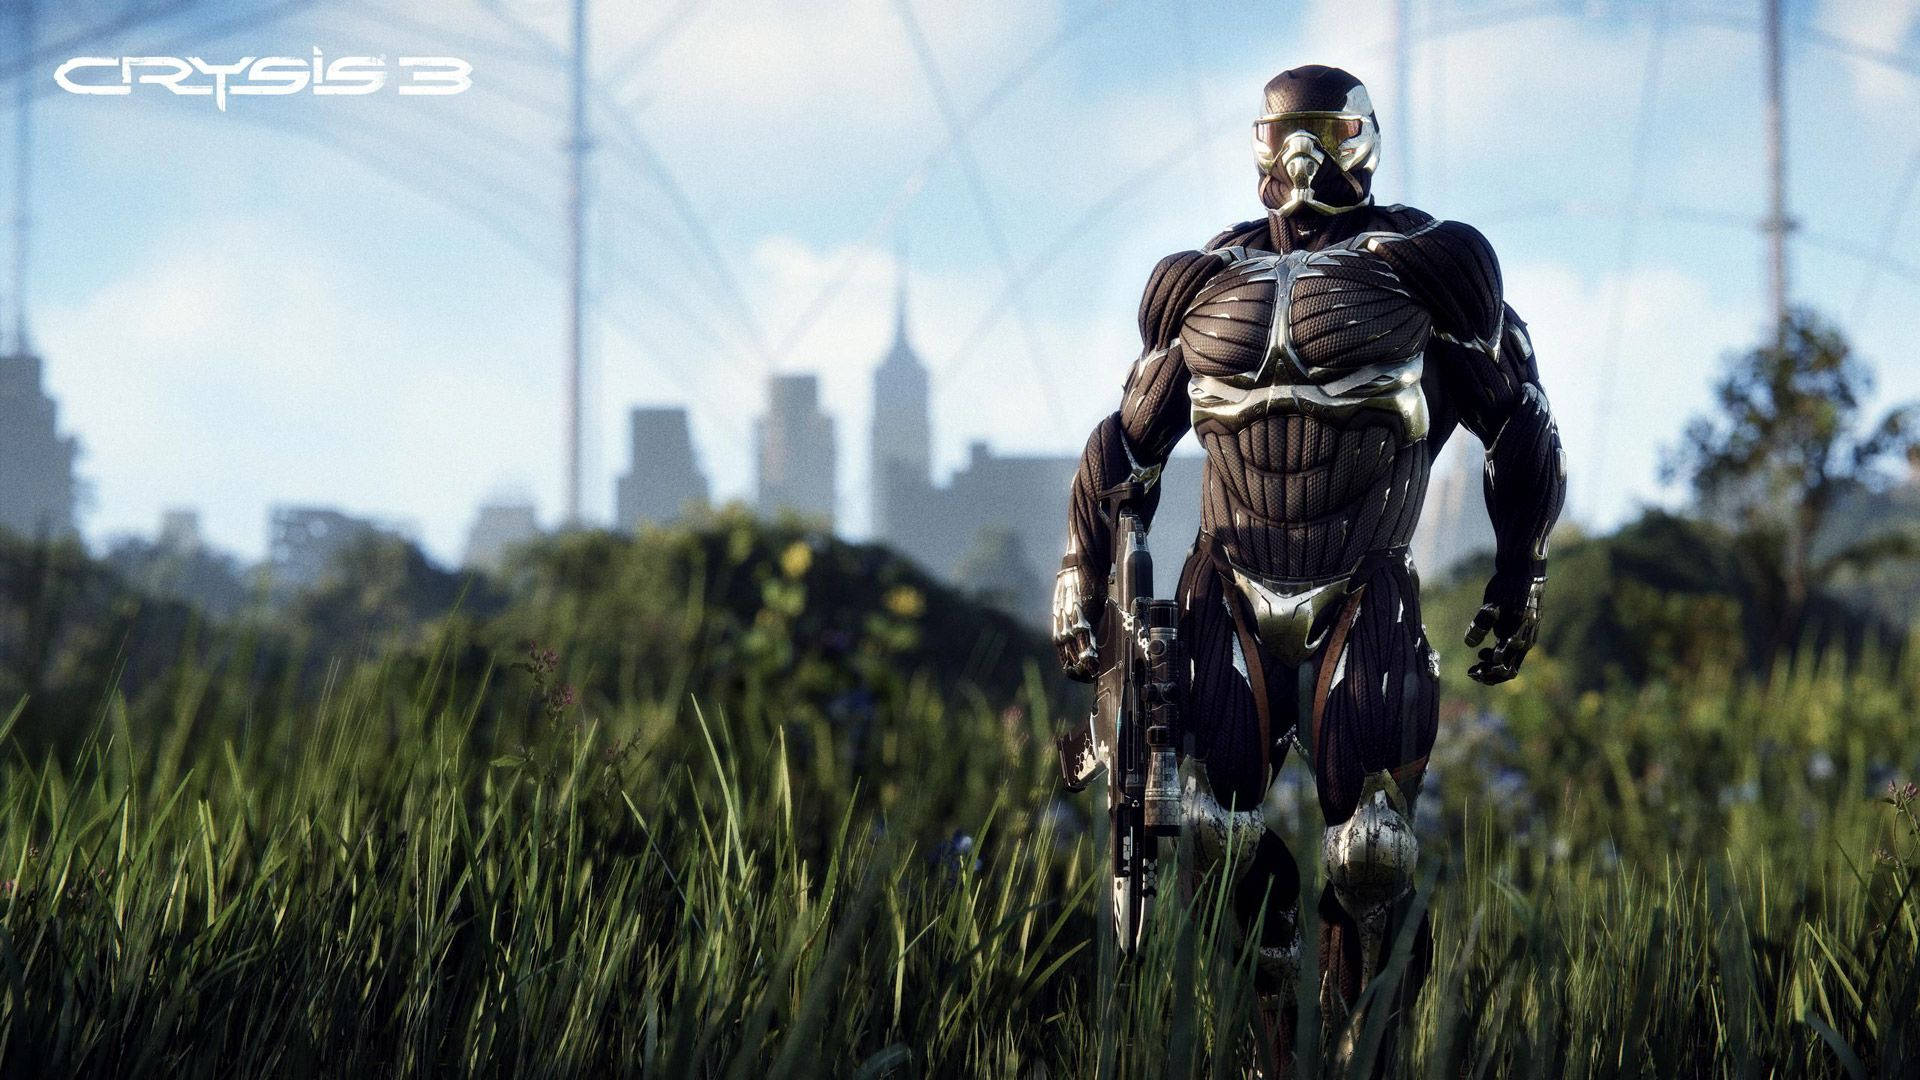 Crysis 3 Prophet On Grass Background